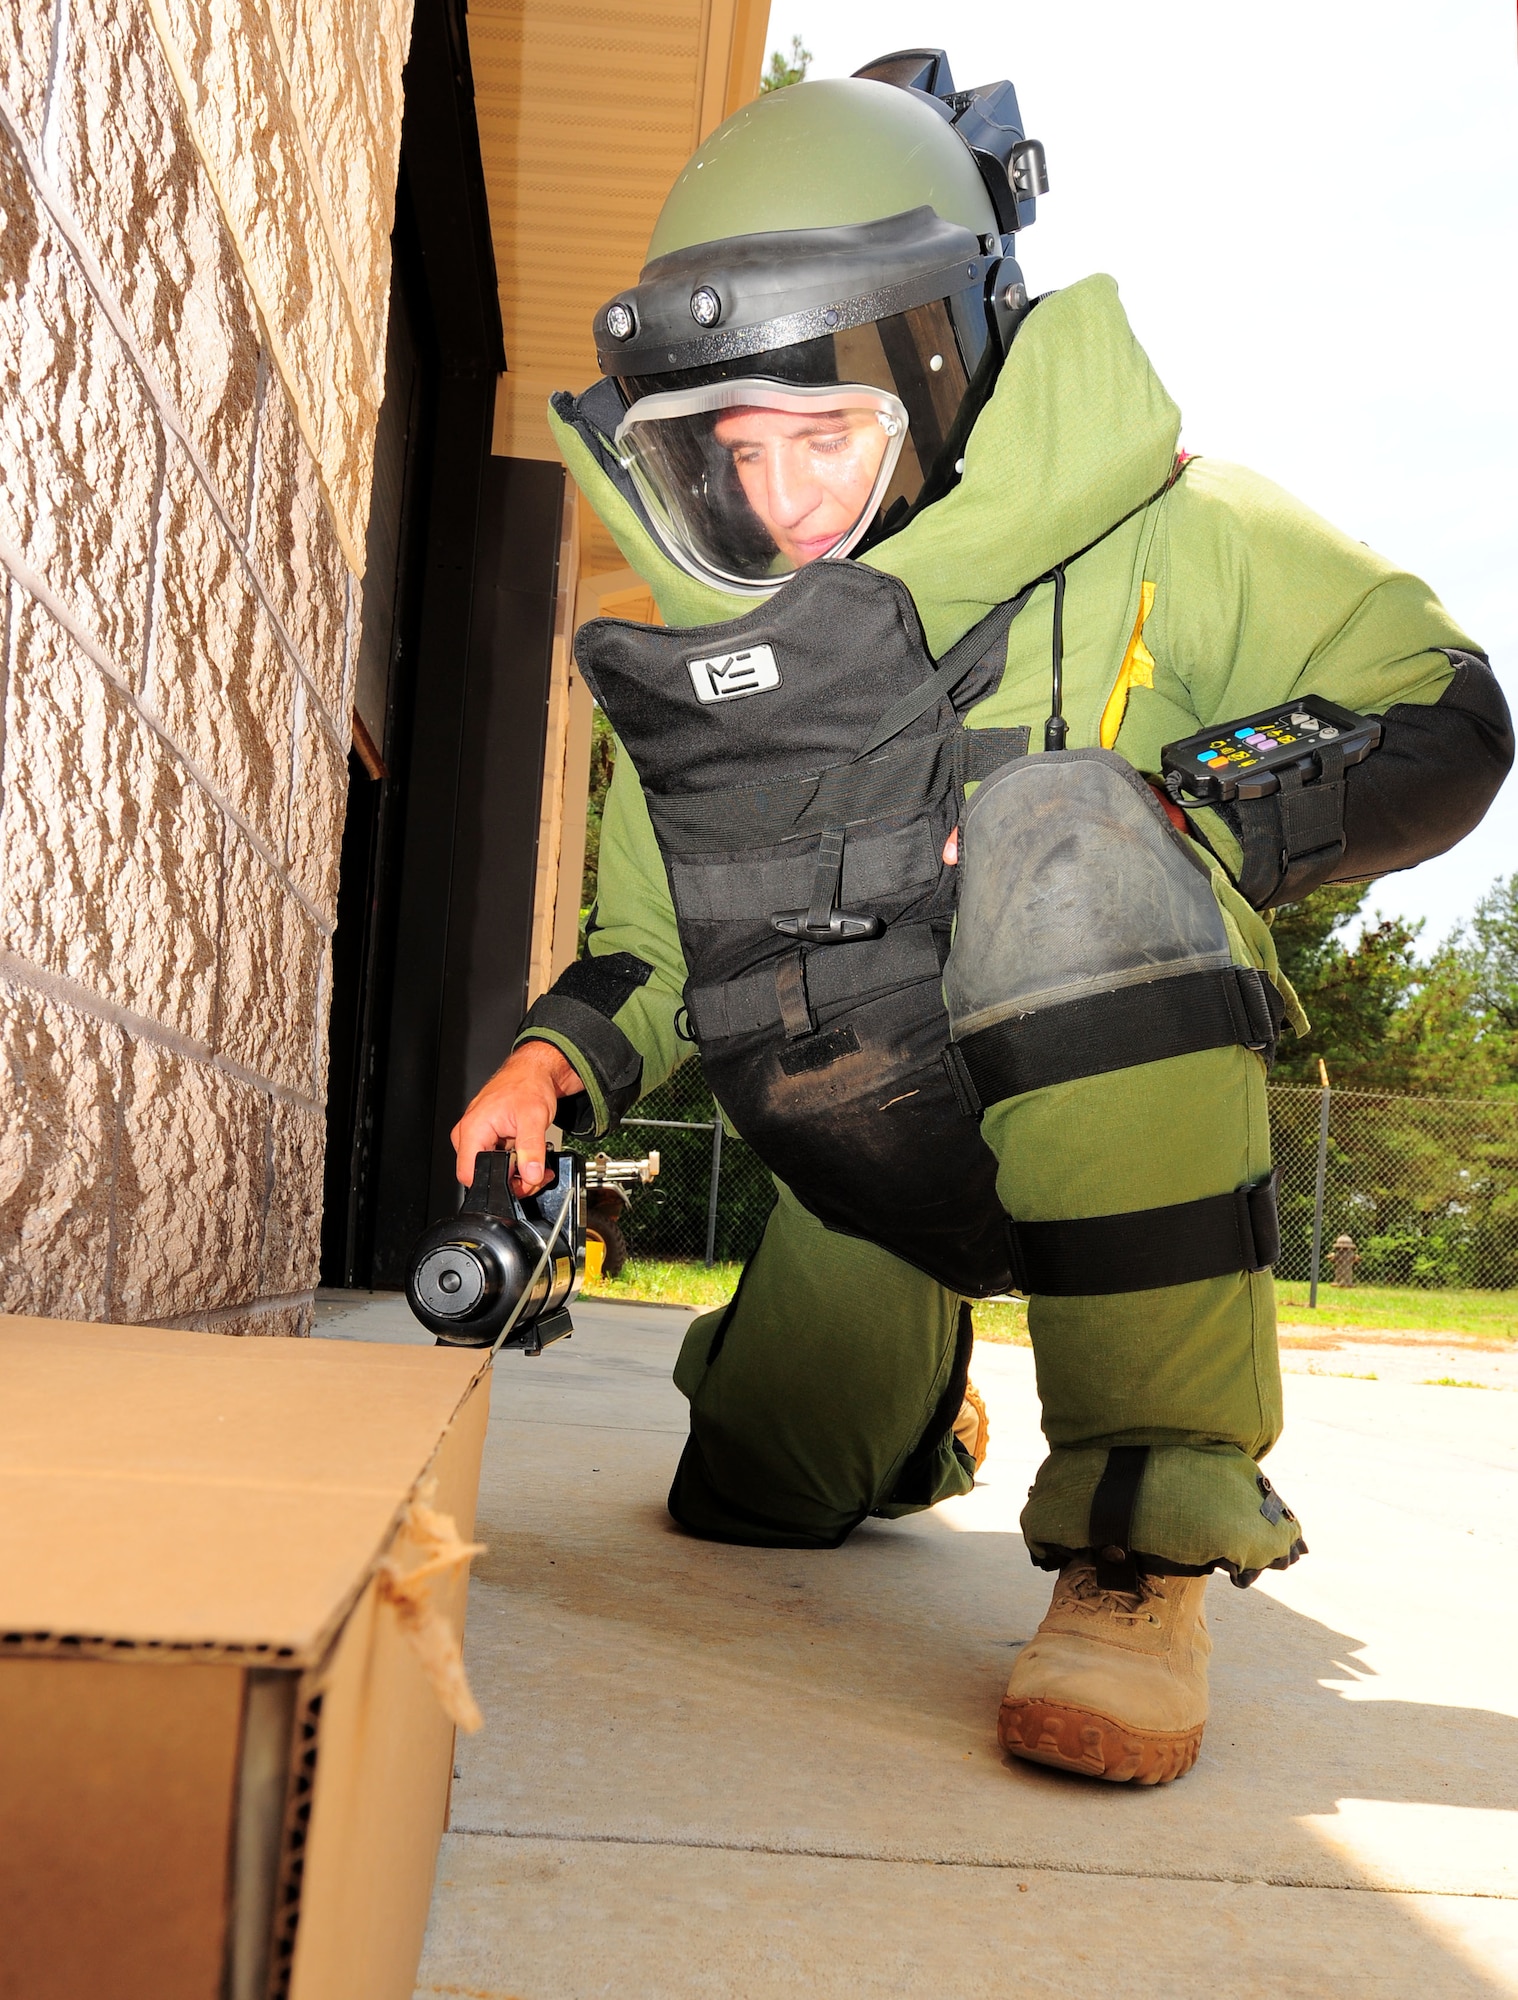 100611-F-8454M-027 SHAW AIR FORCE BASE, S.C. -- Senior Airman Joshua Labott, 20th Explosive Ordinance Disposal apprentice, demonstrates techniques on disabling a suspicious package June 11, 2010. Airman Labott received the Bronze Star with the "V" for valor along with a purple heart for his actions in Afghanistan. (U.S. Air Force Photo/ Senior Airman David Minor)